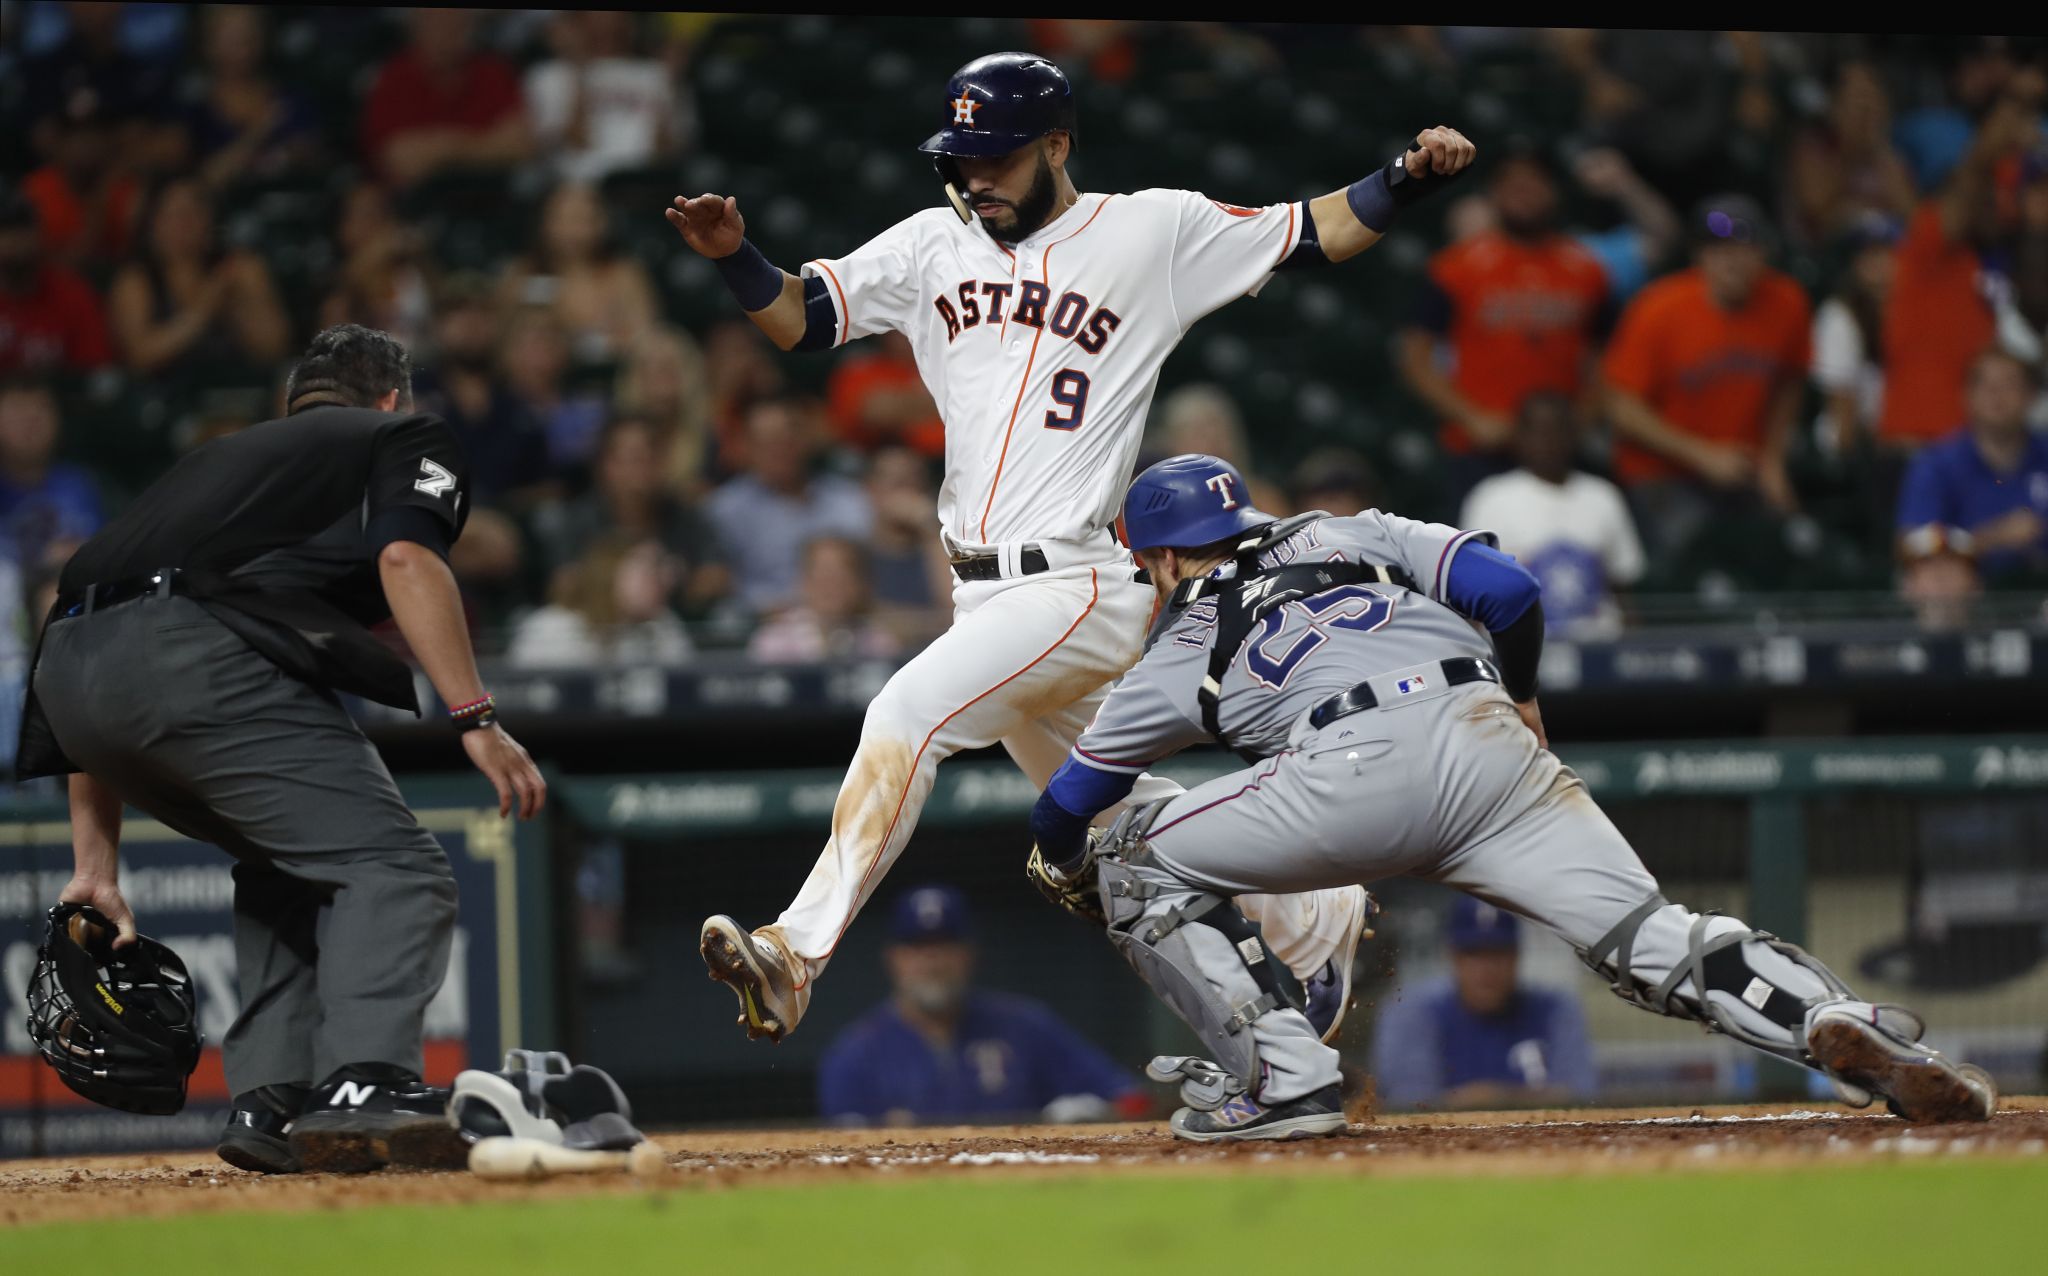 Hurricane Harvey moves Astros-Rangers series to the Rays' field in